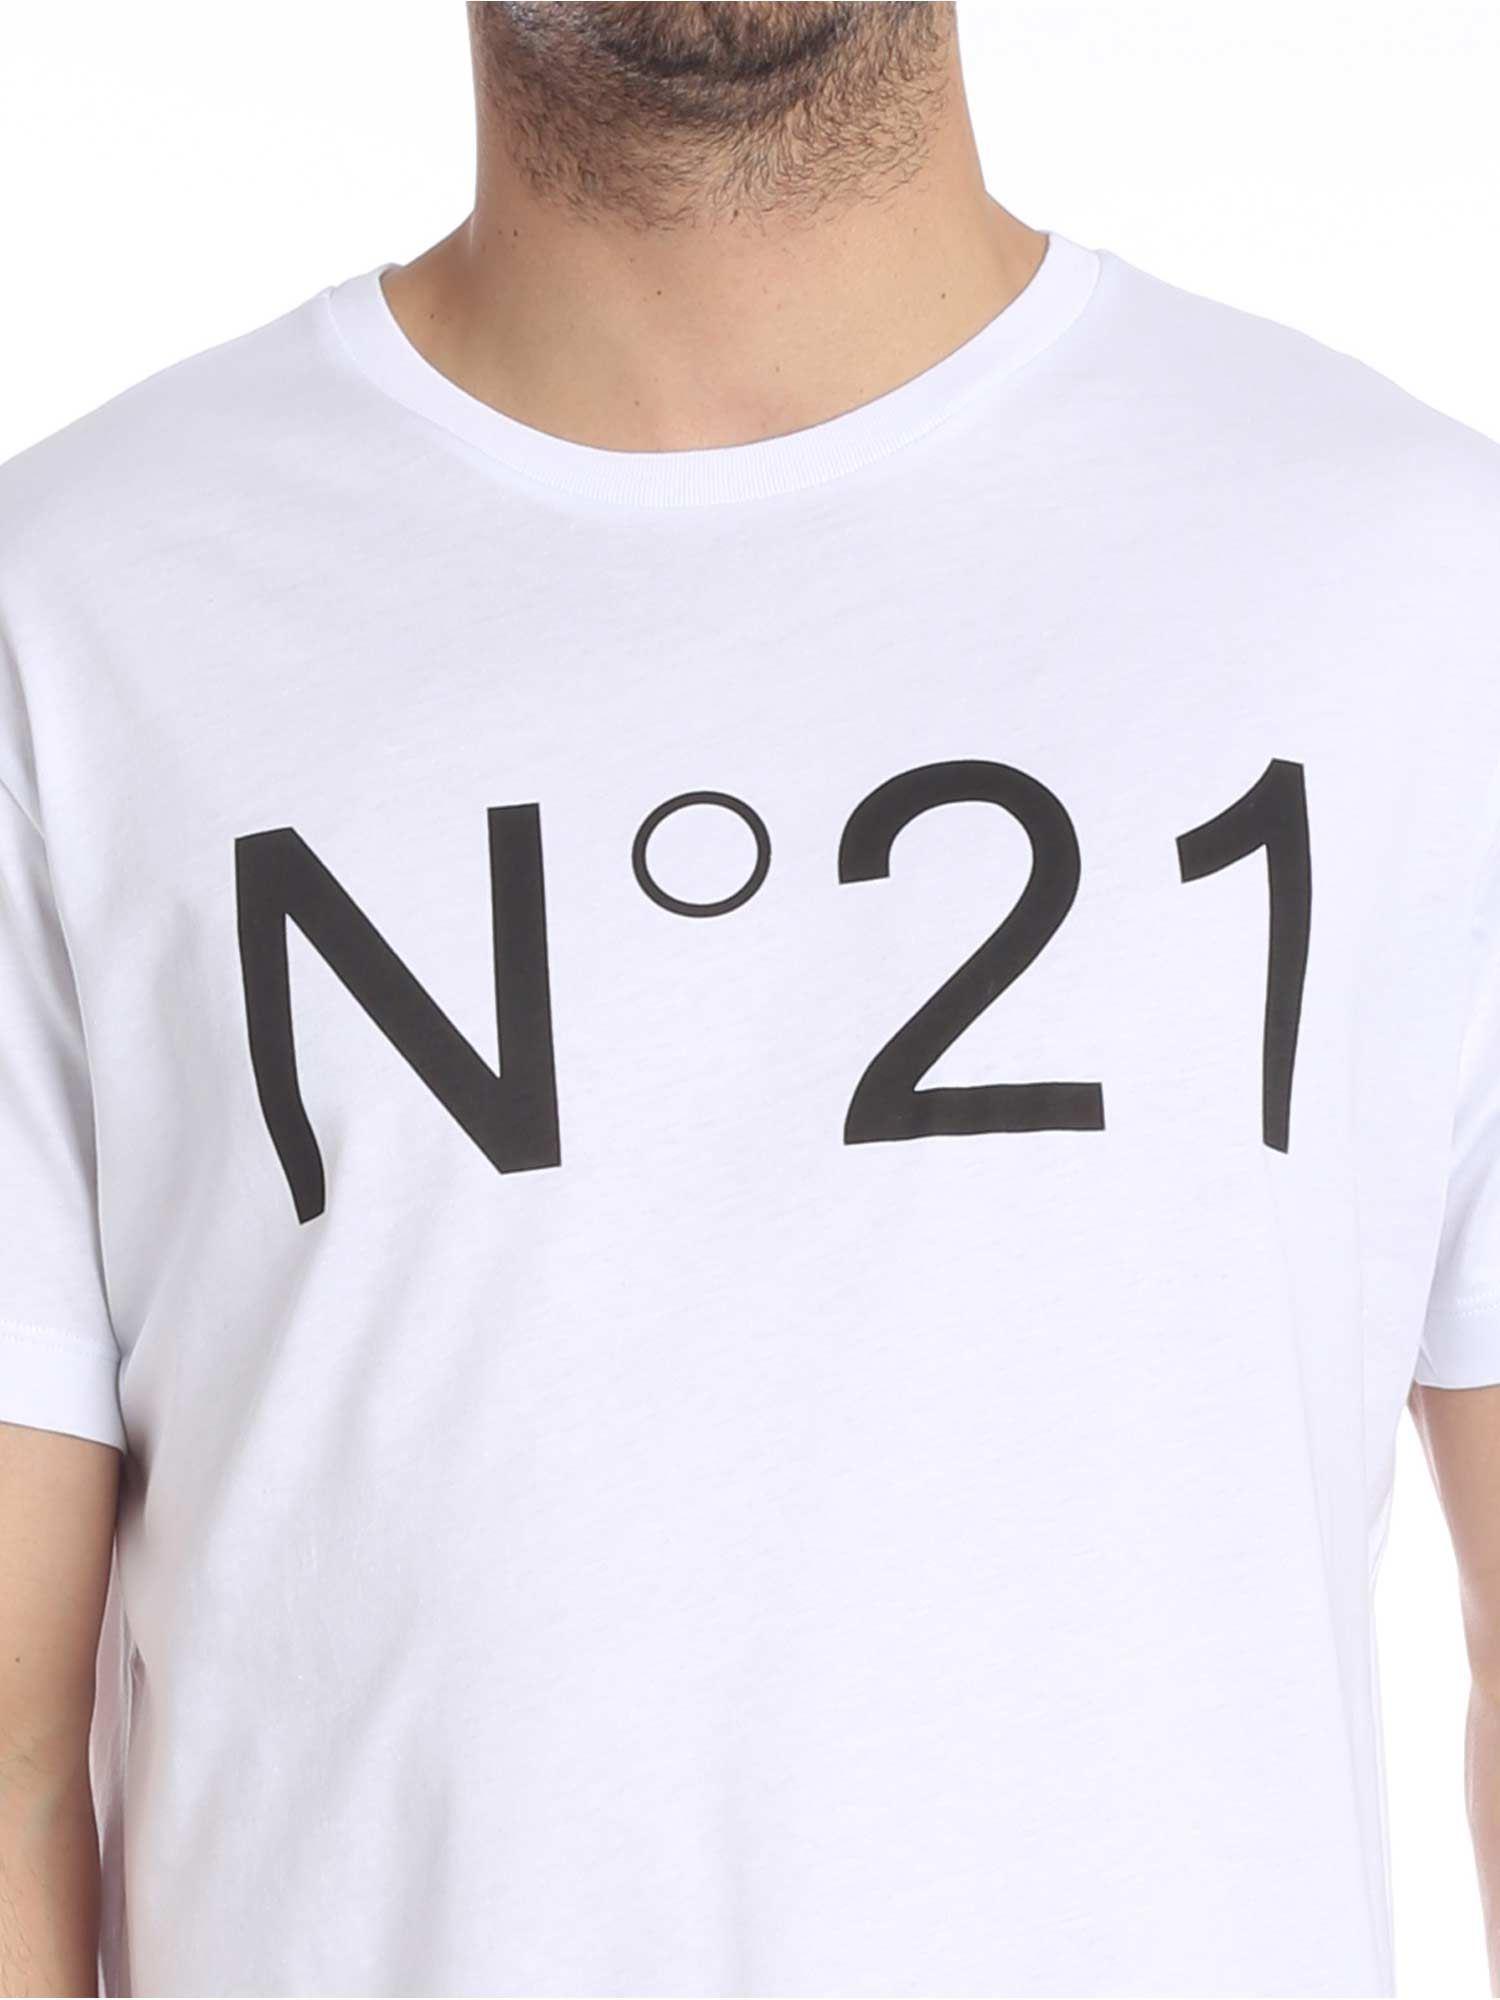 N°21 White Crew Neck T-shirt With N21 Print for Men - Save 7% - Lyst